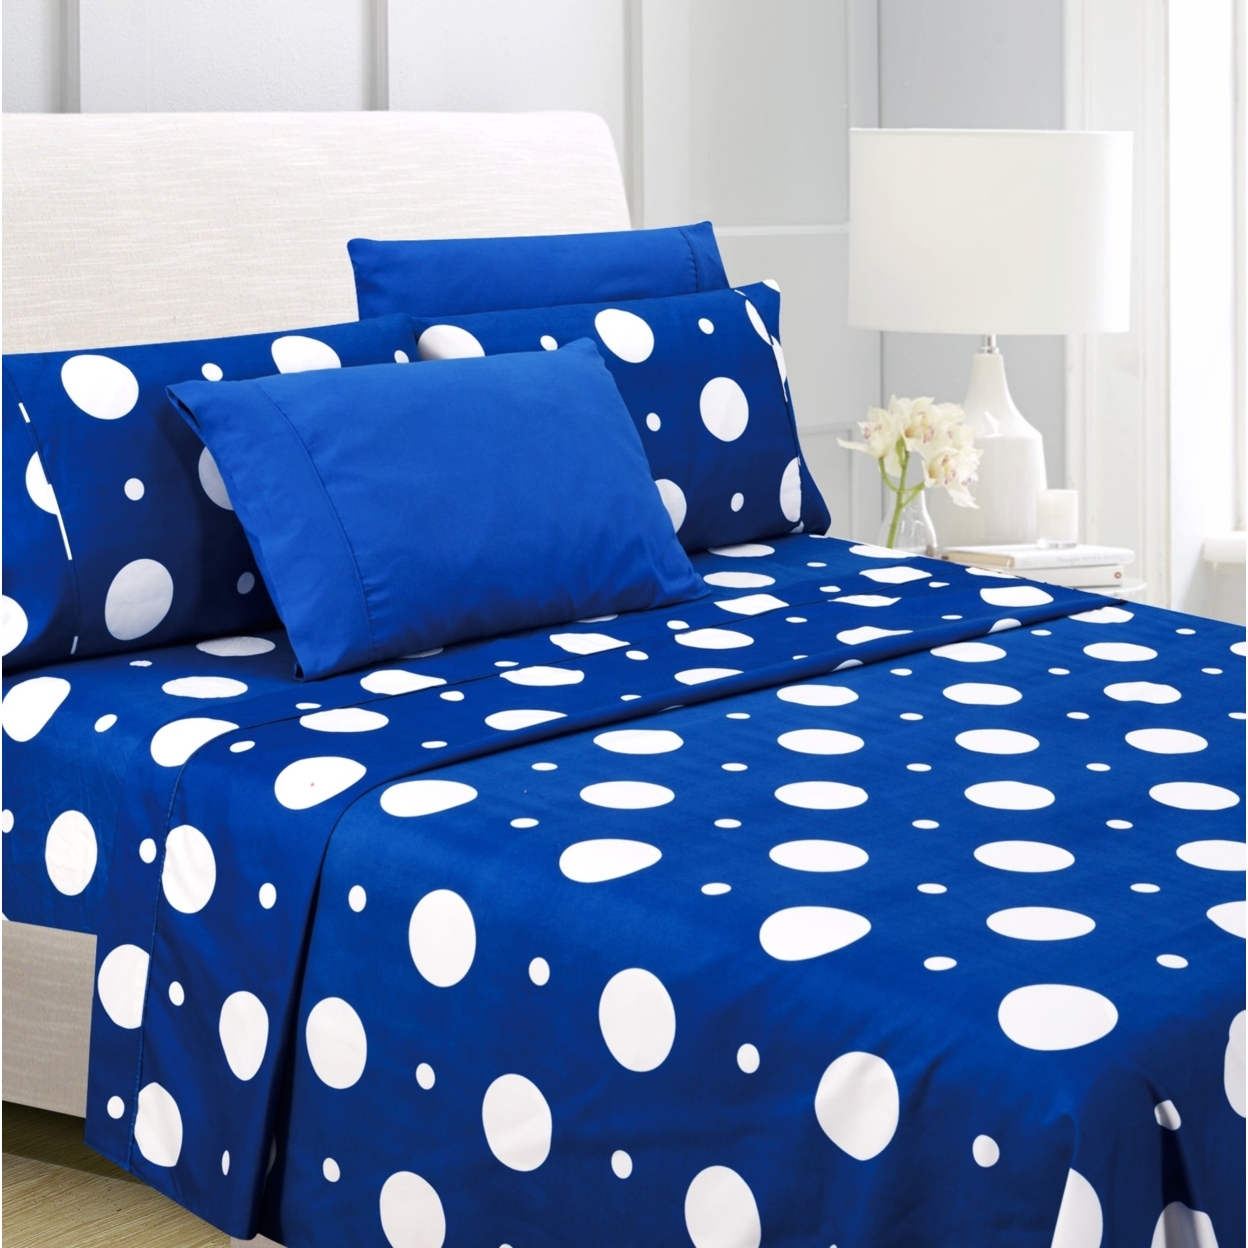 American Home Collection Ultra Soft 4-6 Piece Polka Dot Printed Bed Sheet Set - Twin, Blue